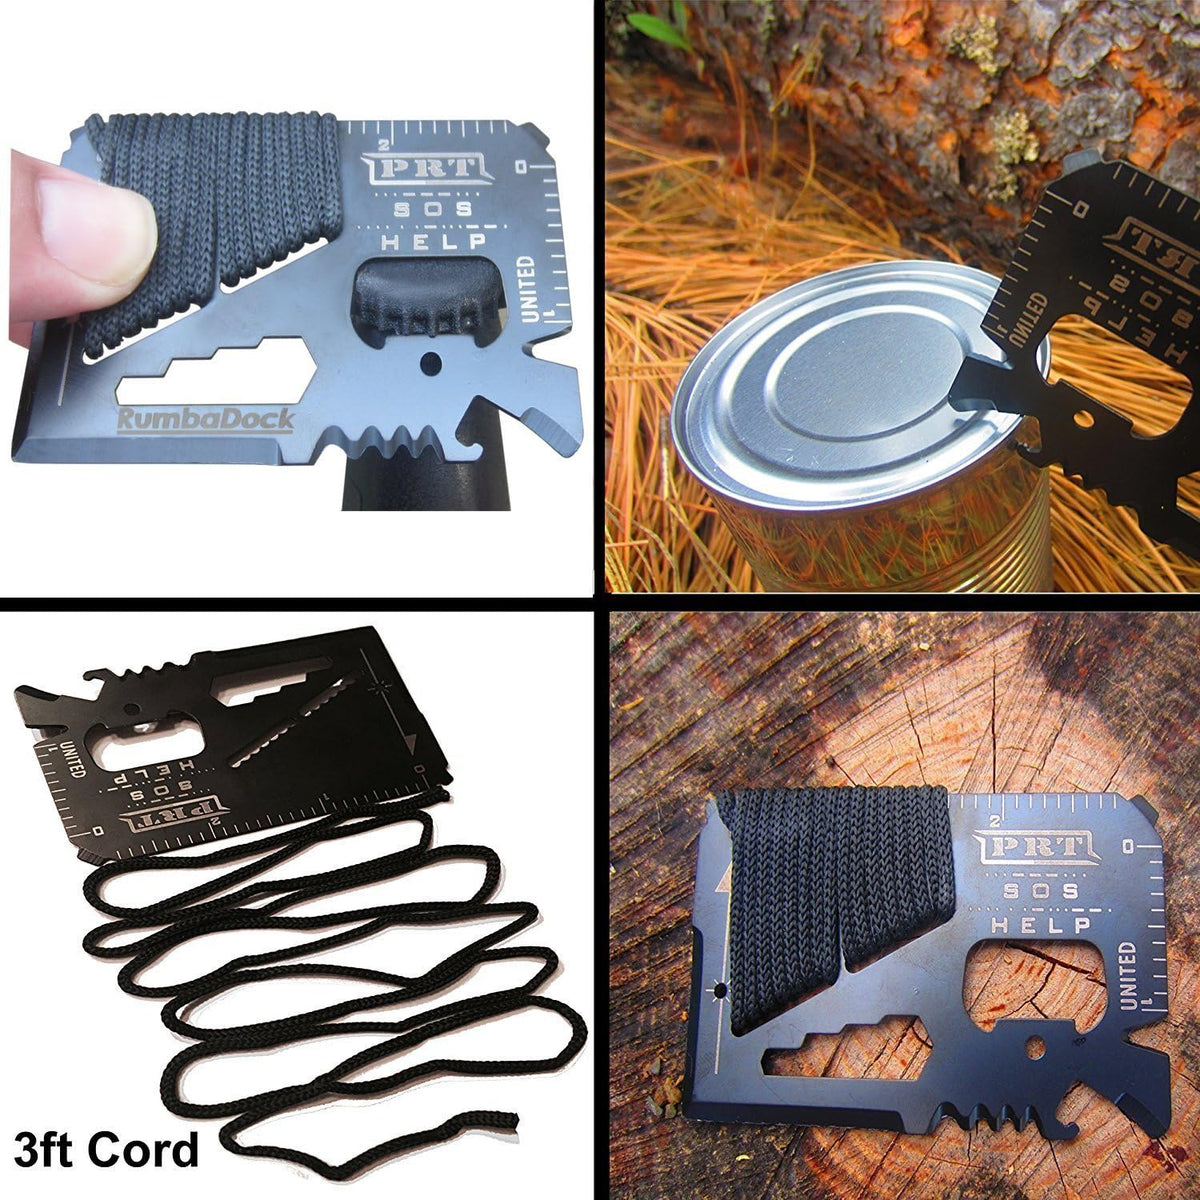 FREE - Ultimate14 Tactical Card (14-in-1 Multitool)- $20.00 Value Each